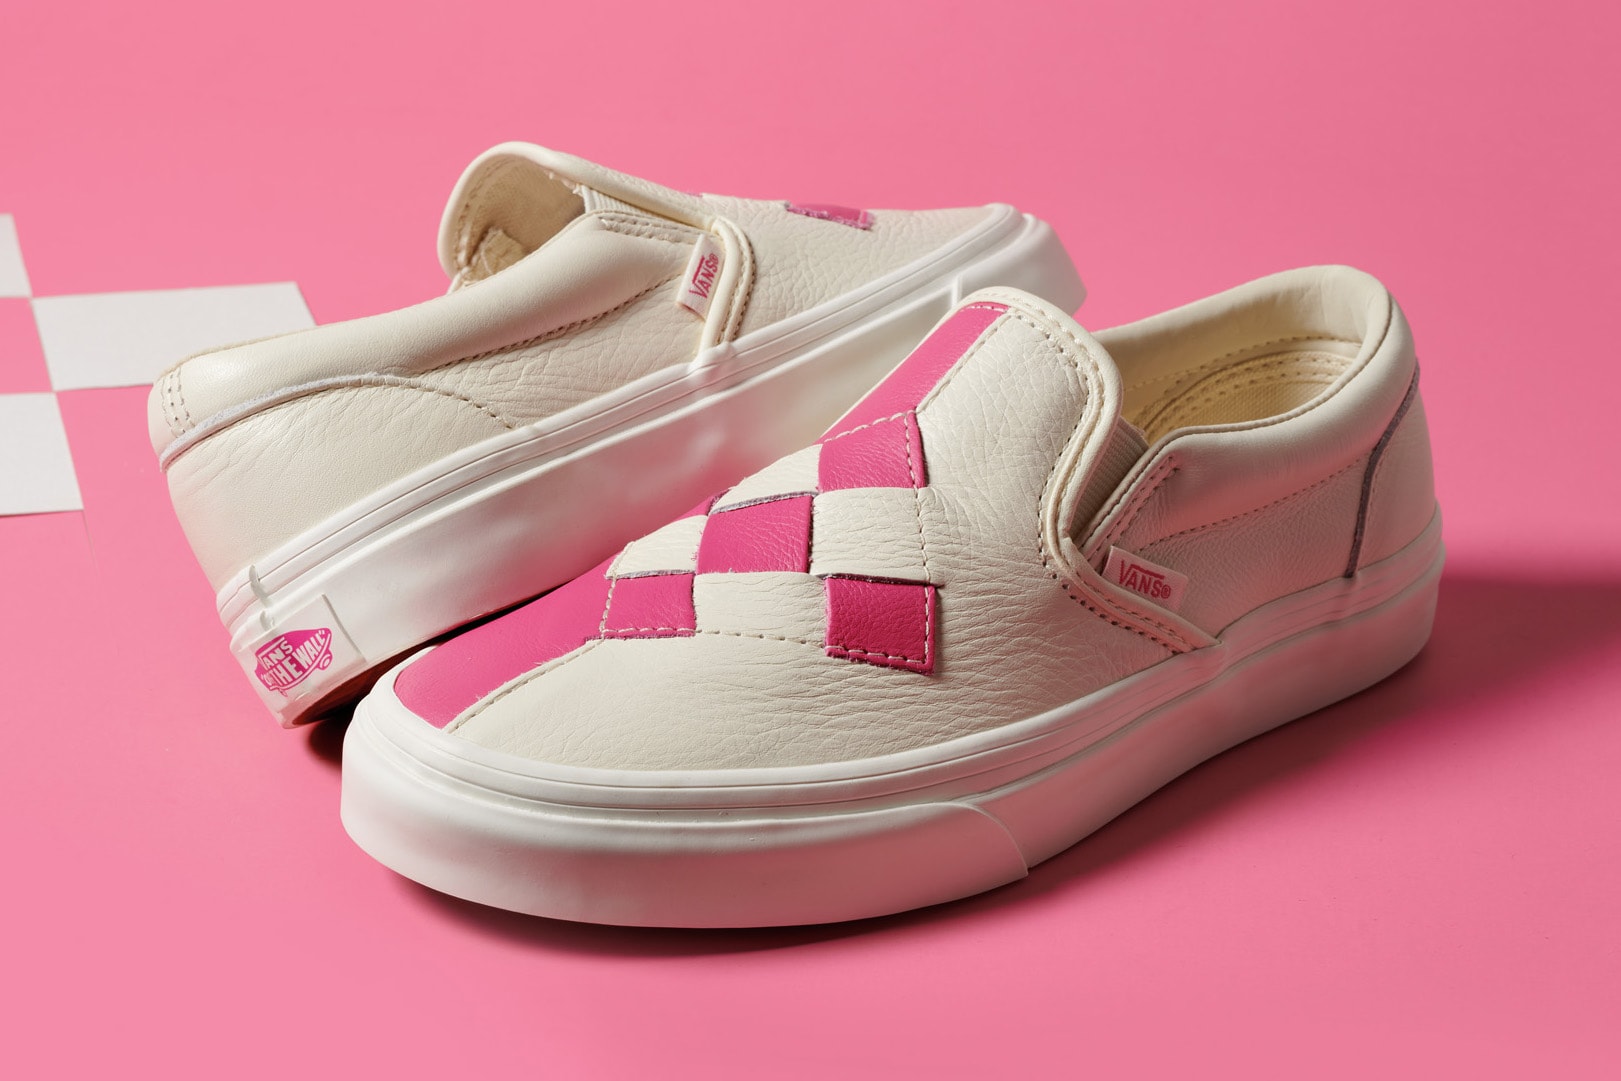 Vans Woven Leather Checkerboard Slip-On Sneakers Pink Cream White Black